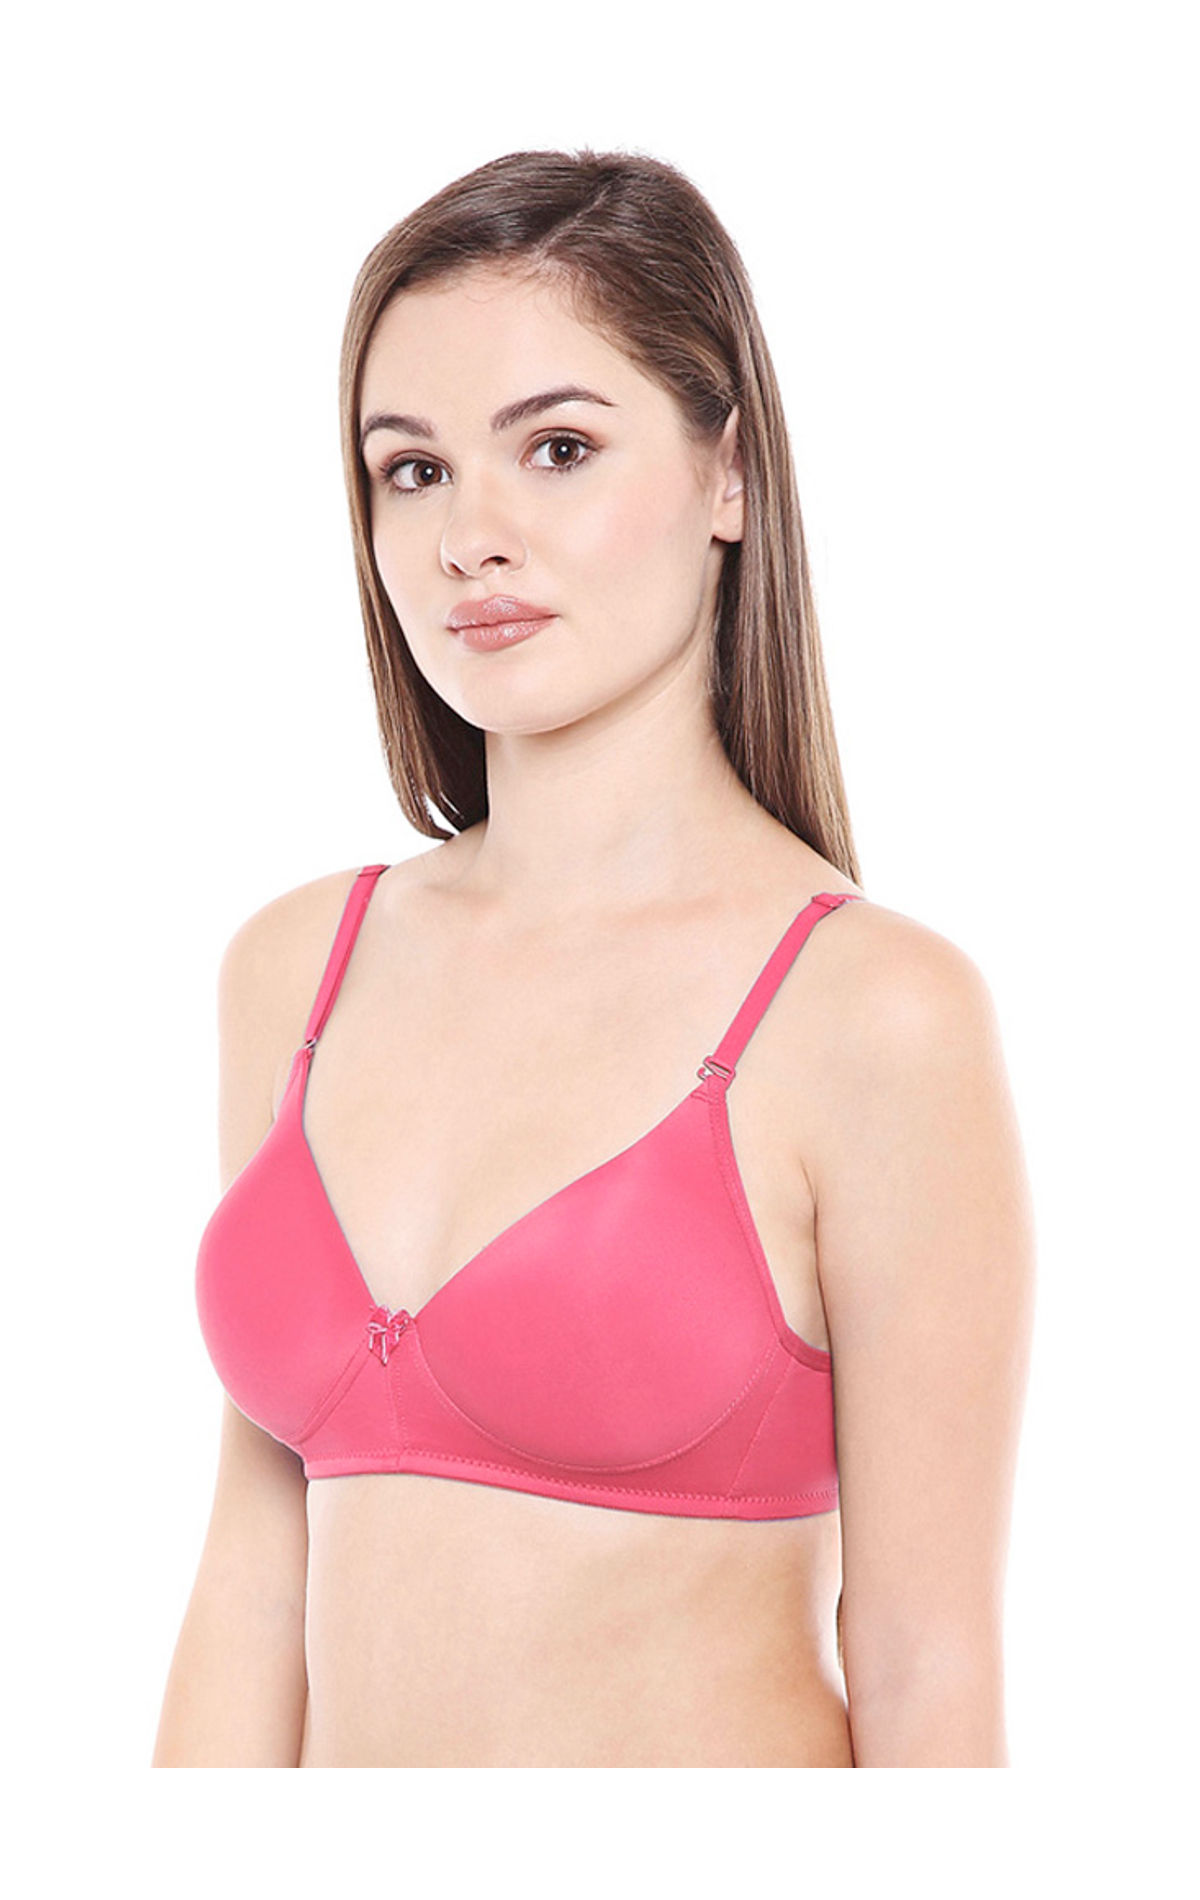 Shaikhhands Multicolor Cotton Padded Pushup Fancy T-shirt Bra with  Net-Multi Colour, for Party Wear at Rs 85/piece in Noida